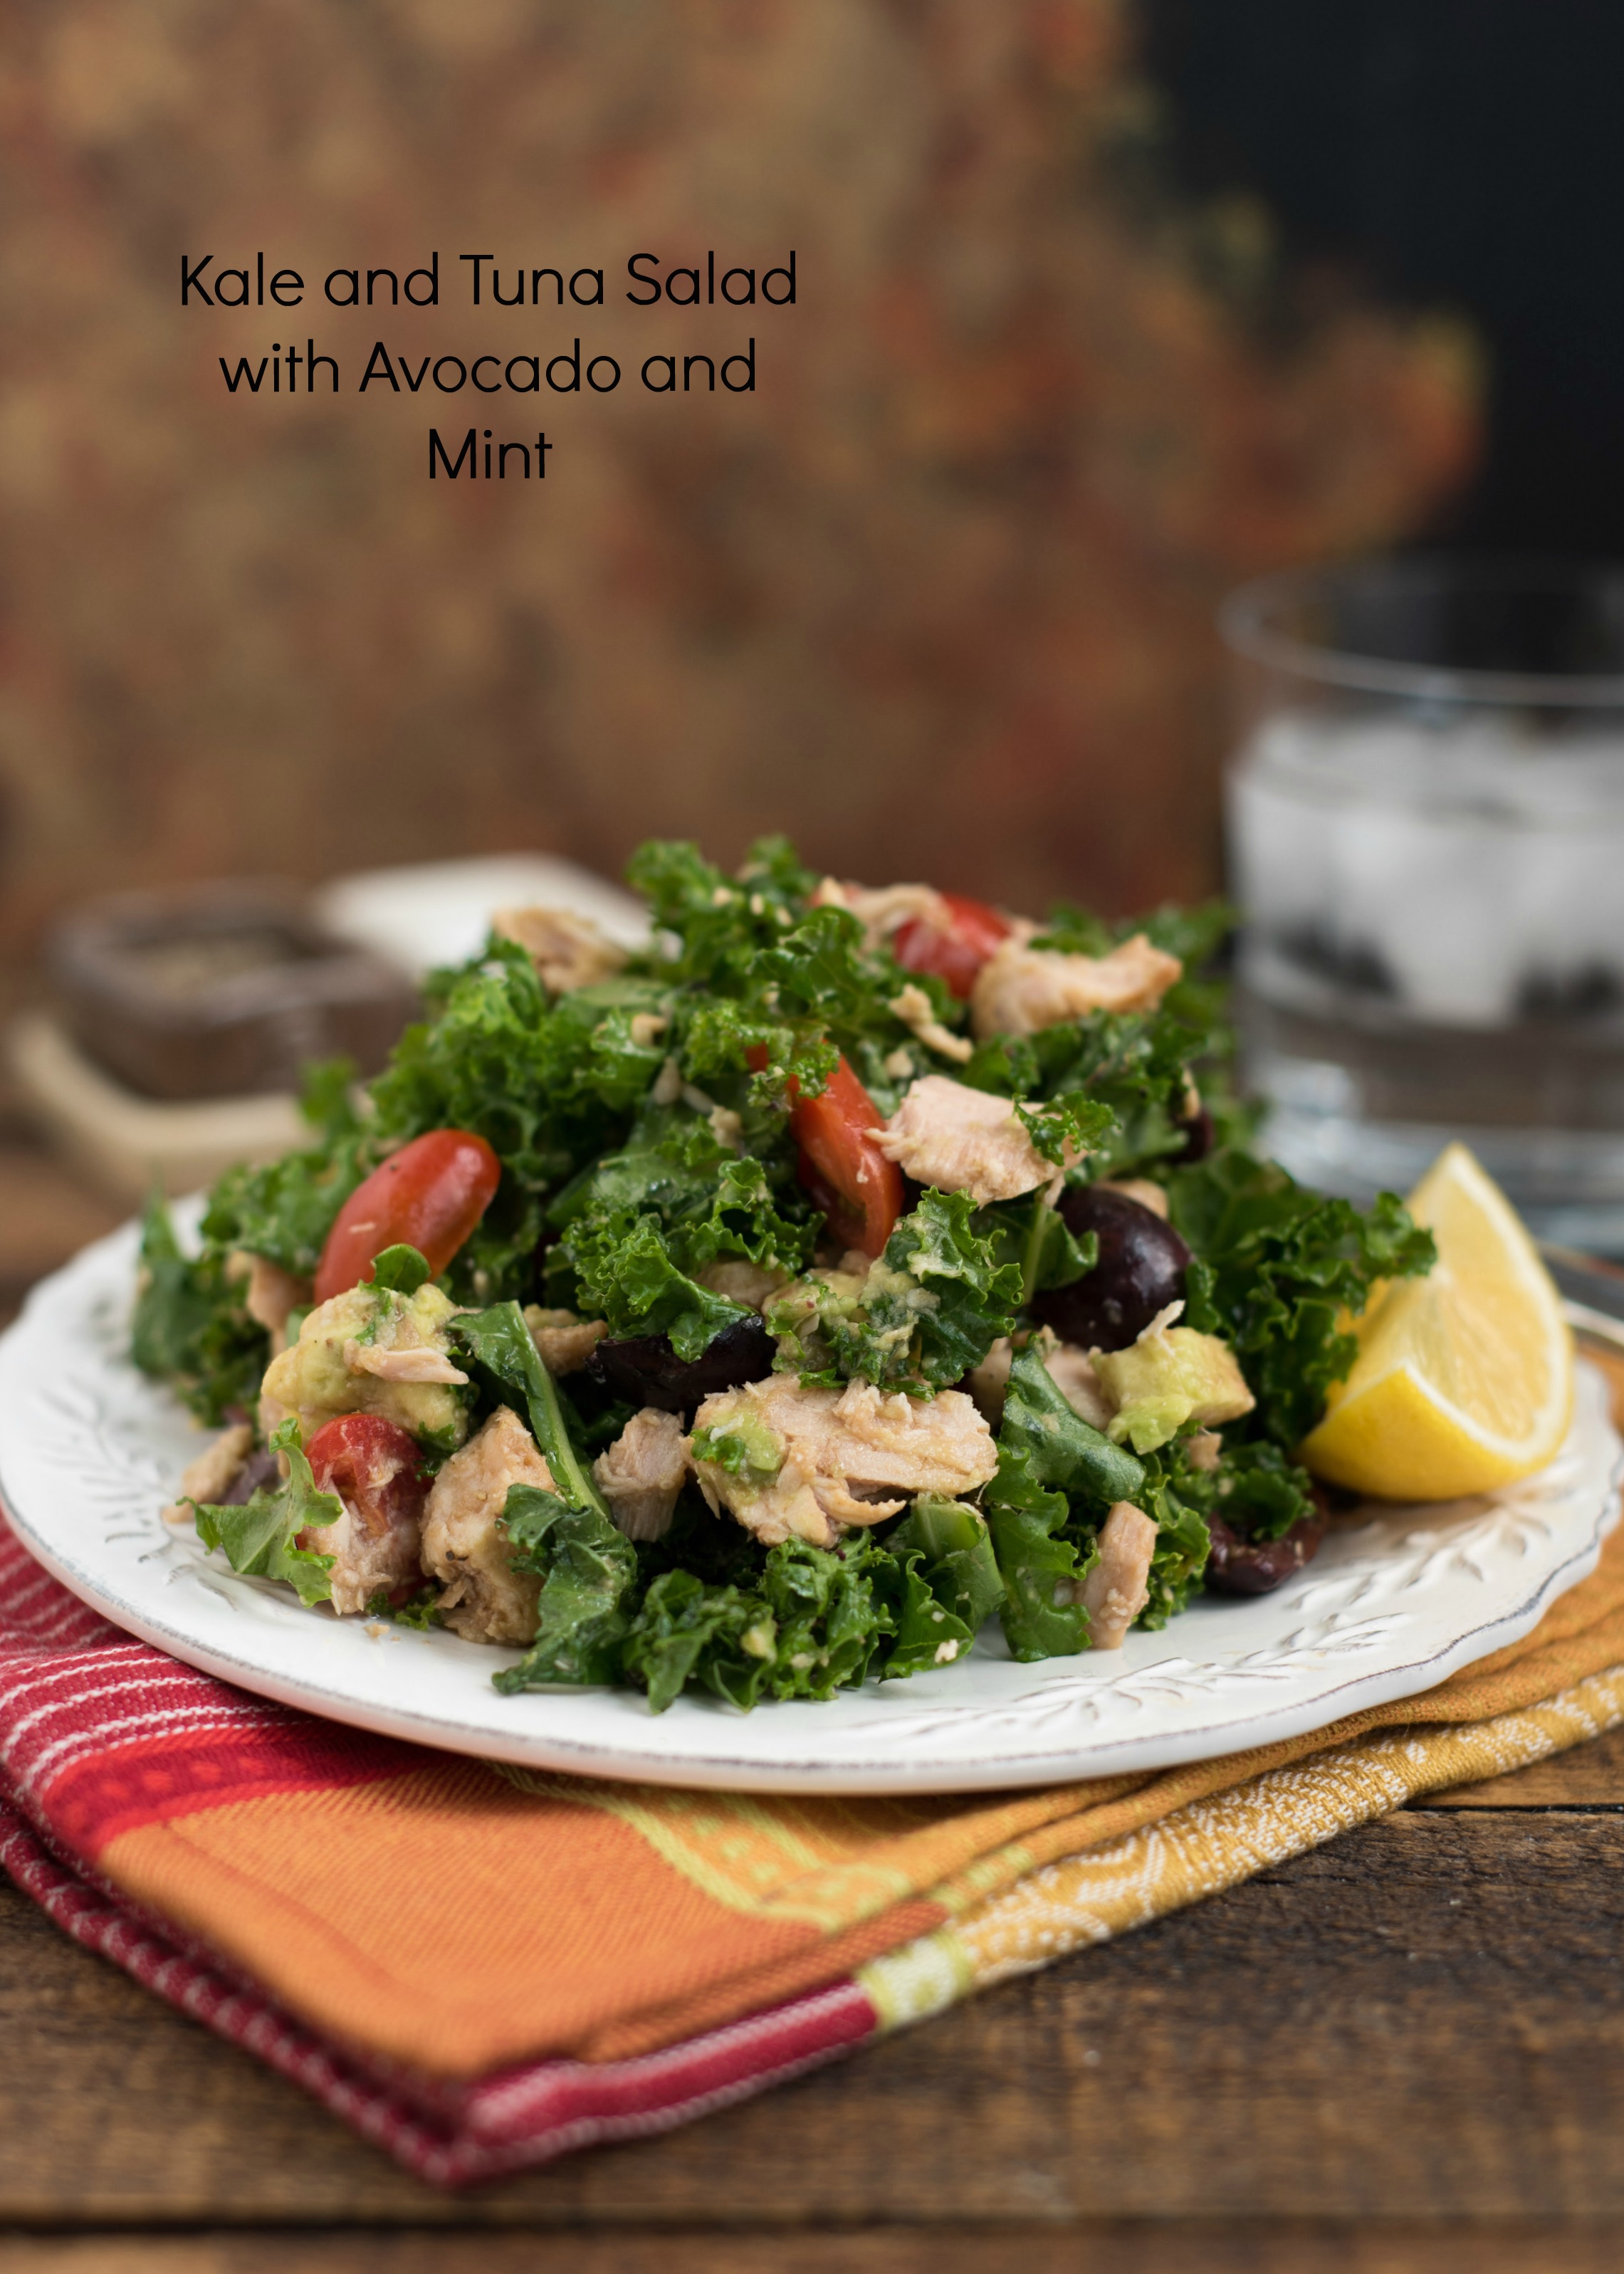 Kale and Tuna Salad With Avocado and Mint- a great make-ahead salad for weekday lunches. Delicious, healthy, Paleo-friendly and Vegetarian! | www.nutritiouseats.com